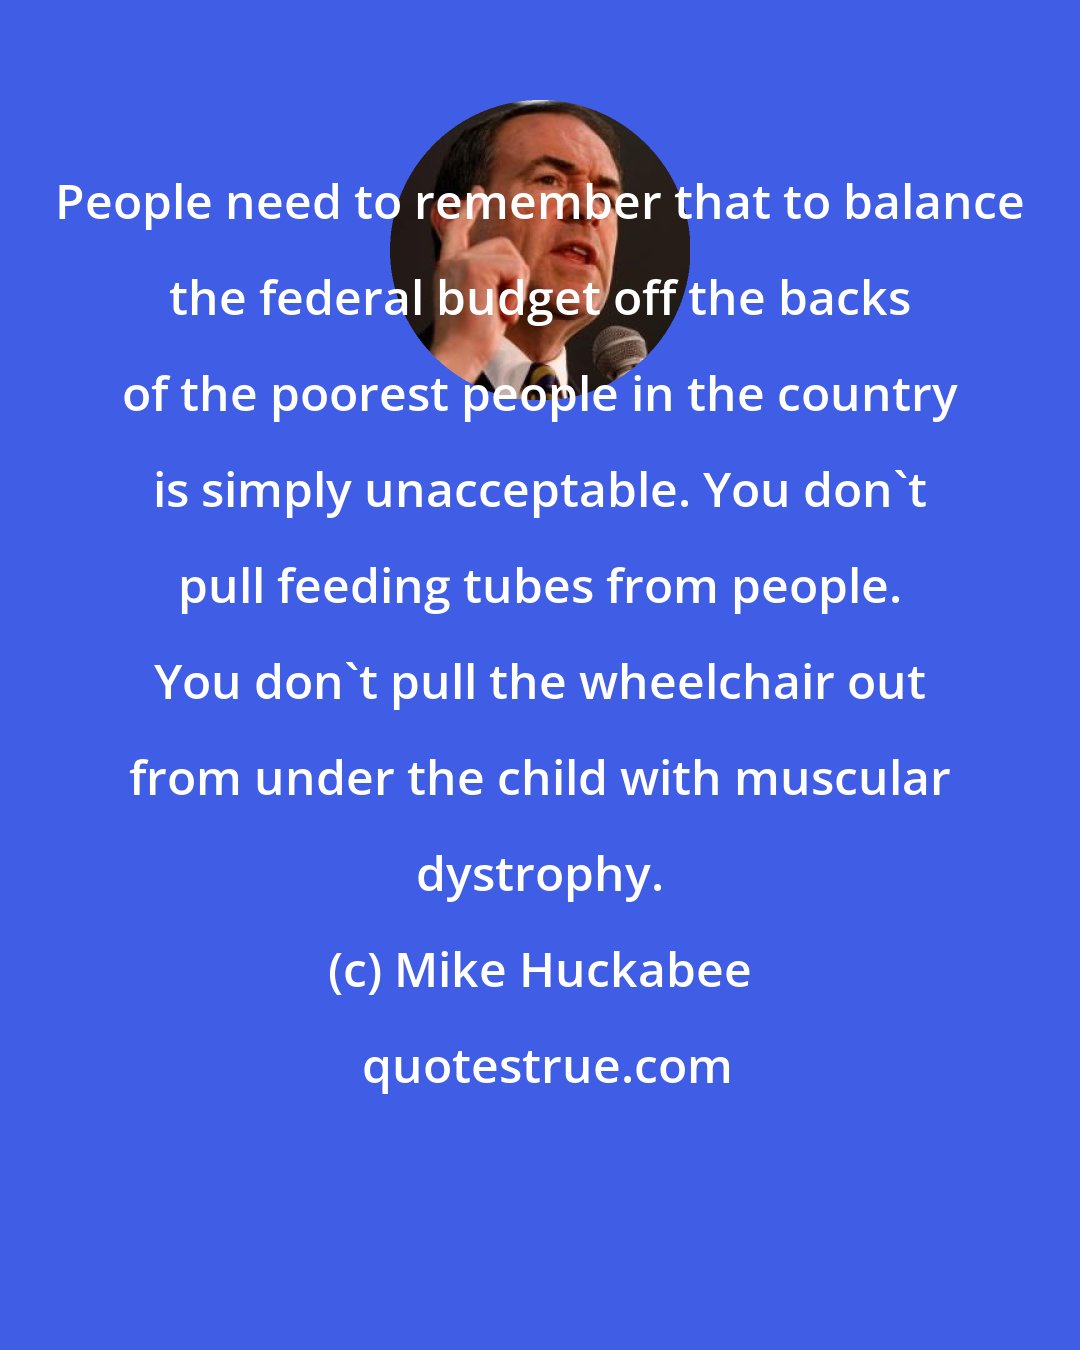 Mike Huckabee: People need to remember that to balance the federal budget off the backs of the poorest people in the country is simply unacceptable. You don't pull feeding tubes from people. You don't pull the wheelchair out from under the child with muscular dystrophy.